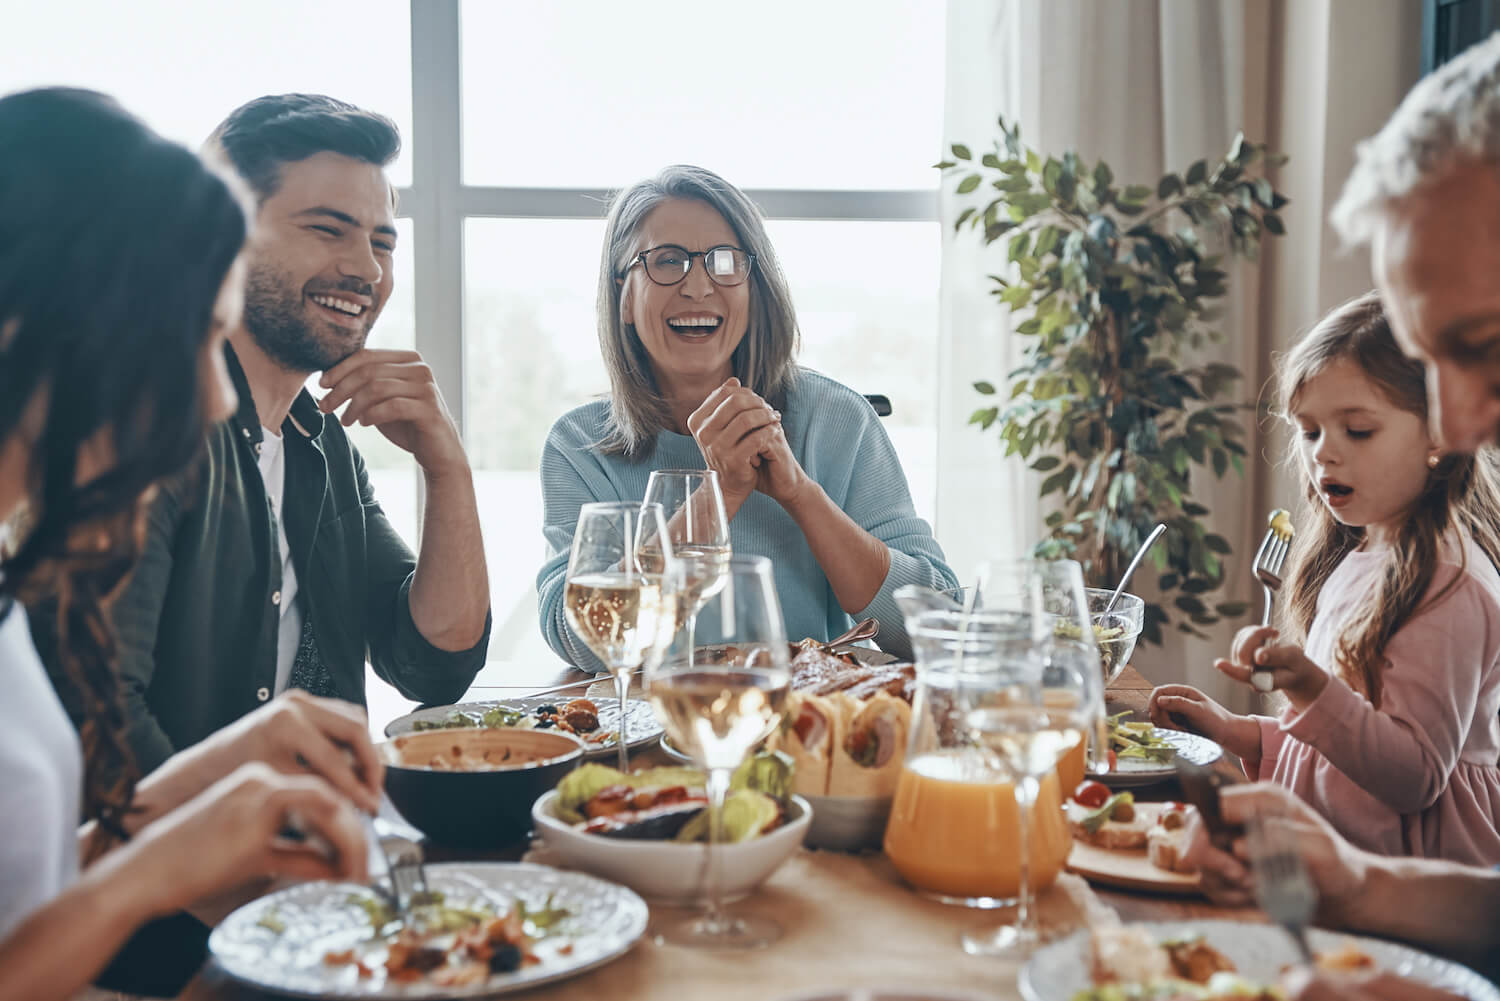 How Dining With Your Loved Ones Can Make Your Life Better